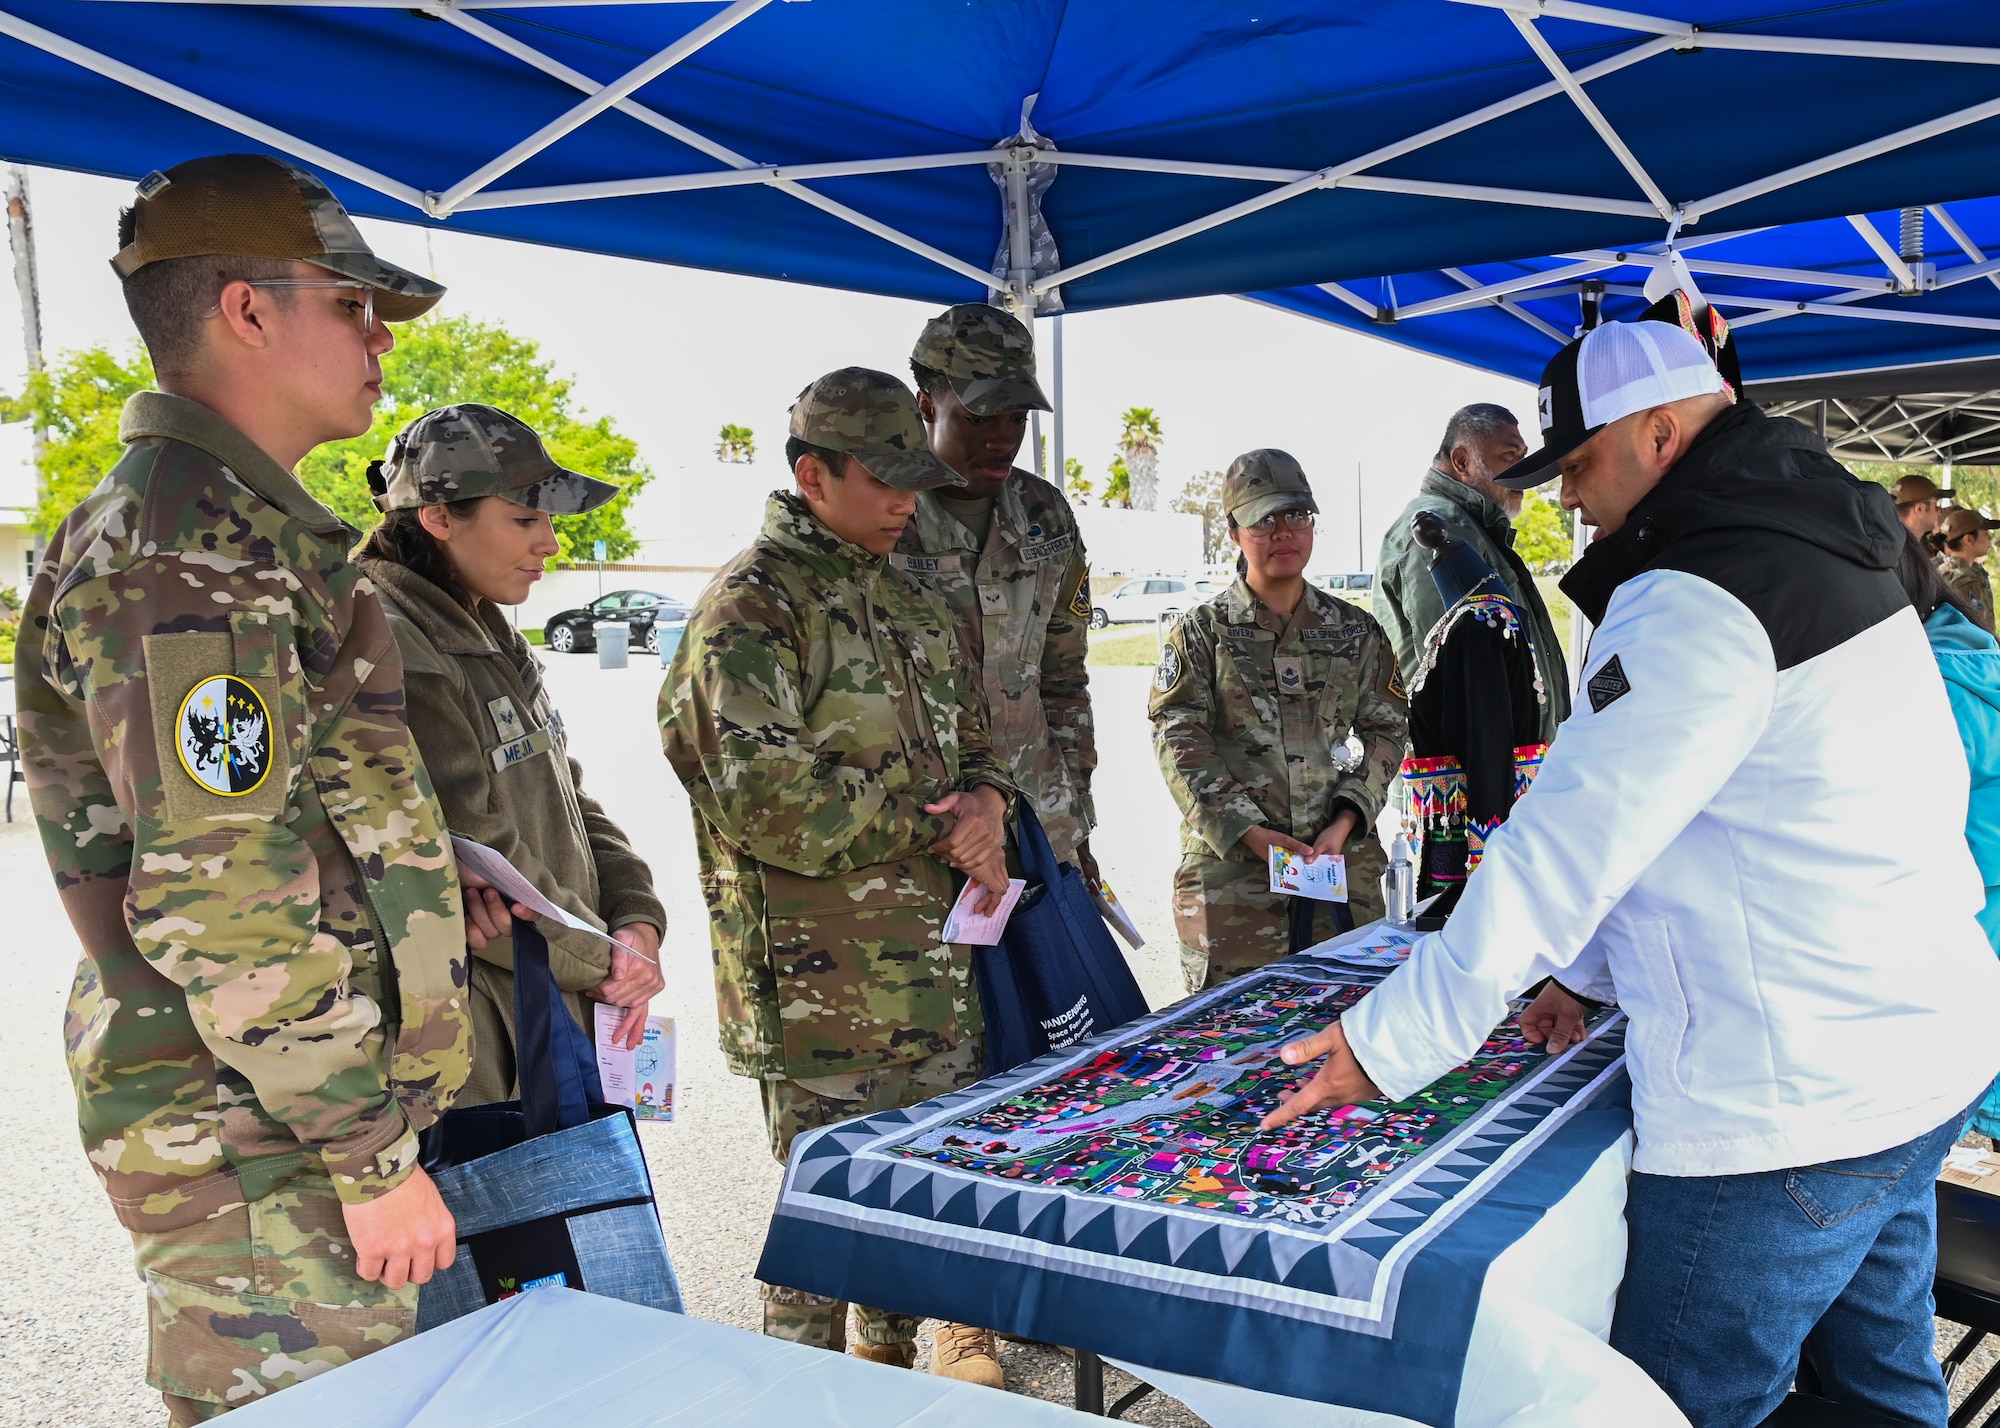 Master Sgt. Jessie Lee, 30th Healthcare Operations Squadron senior enlisted leader, explains the history displayed of the Hmong people on the tapestry placed on the table during the Around the World passport event at Vandenberg Space Force Base, Calif., May 19, 2023. The Hmong people are an indigenous group in East and Southeast Asia. (U.S. Space Force photo by Senior Airman Tiarra Sibley)